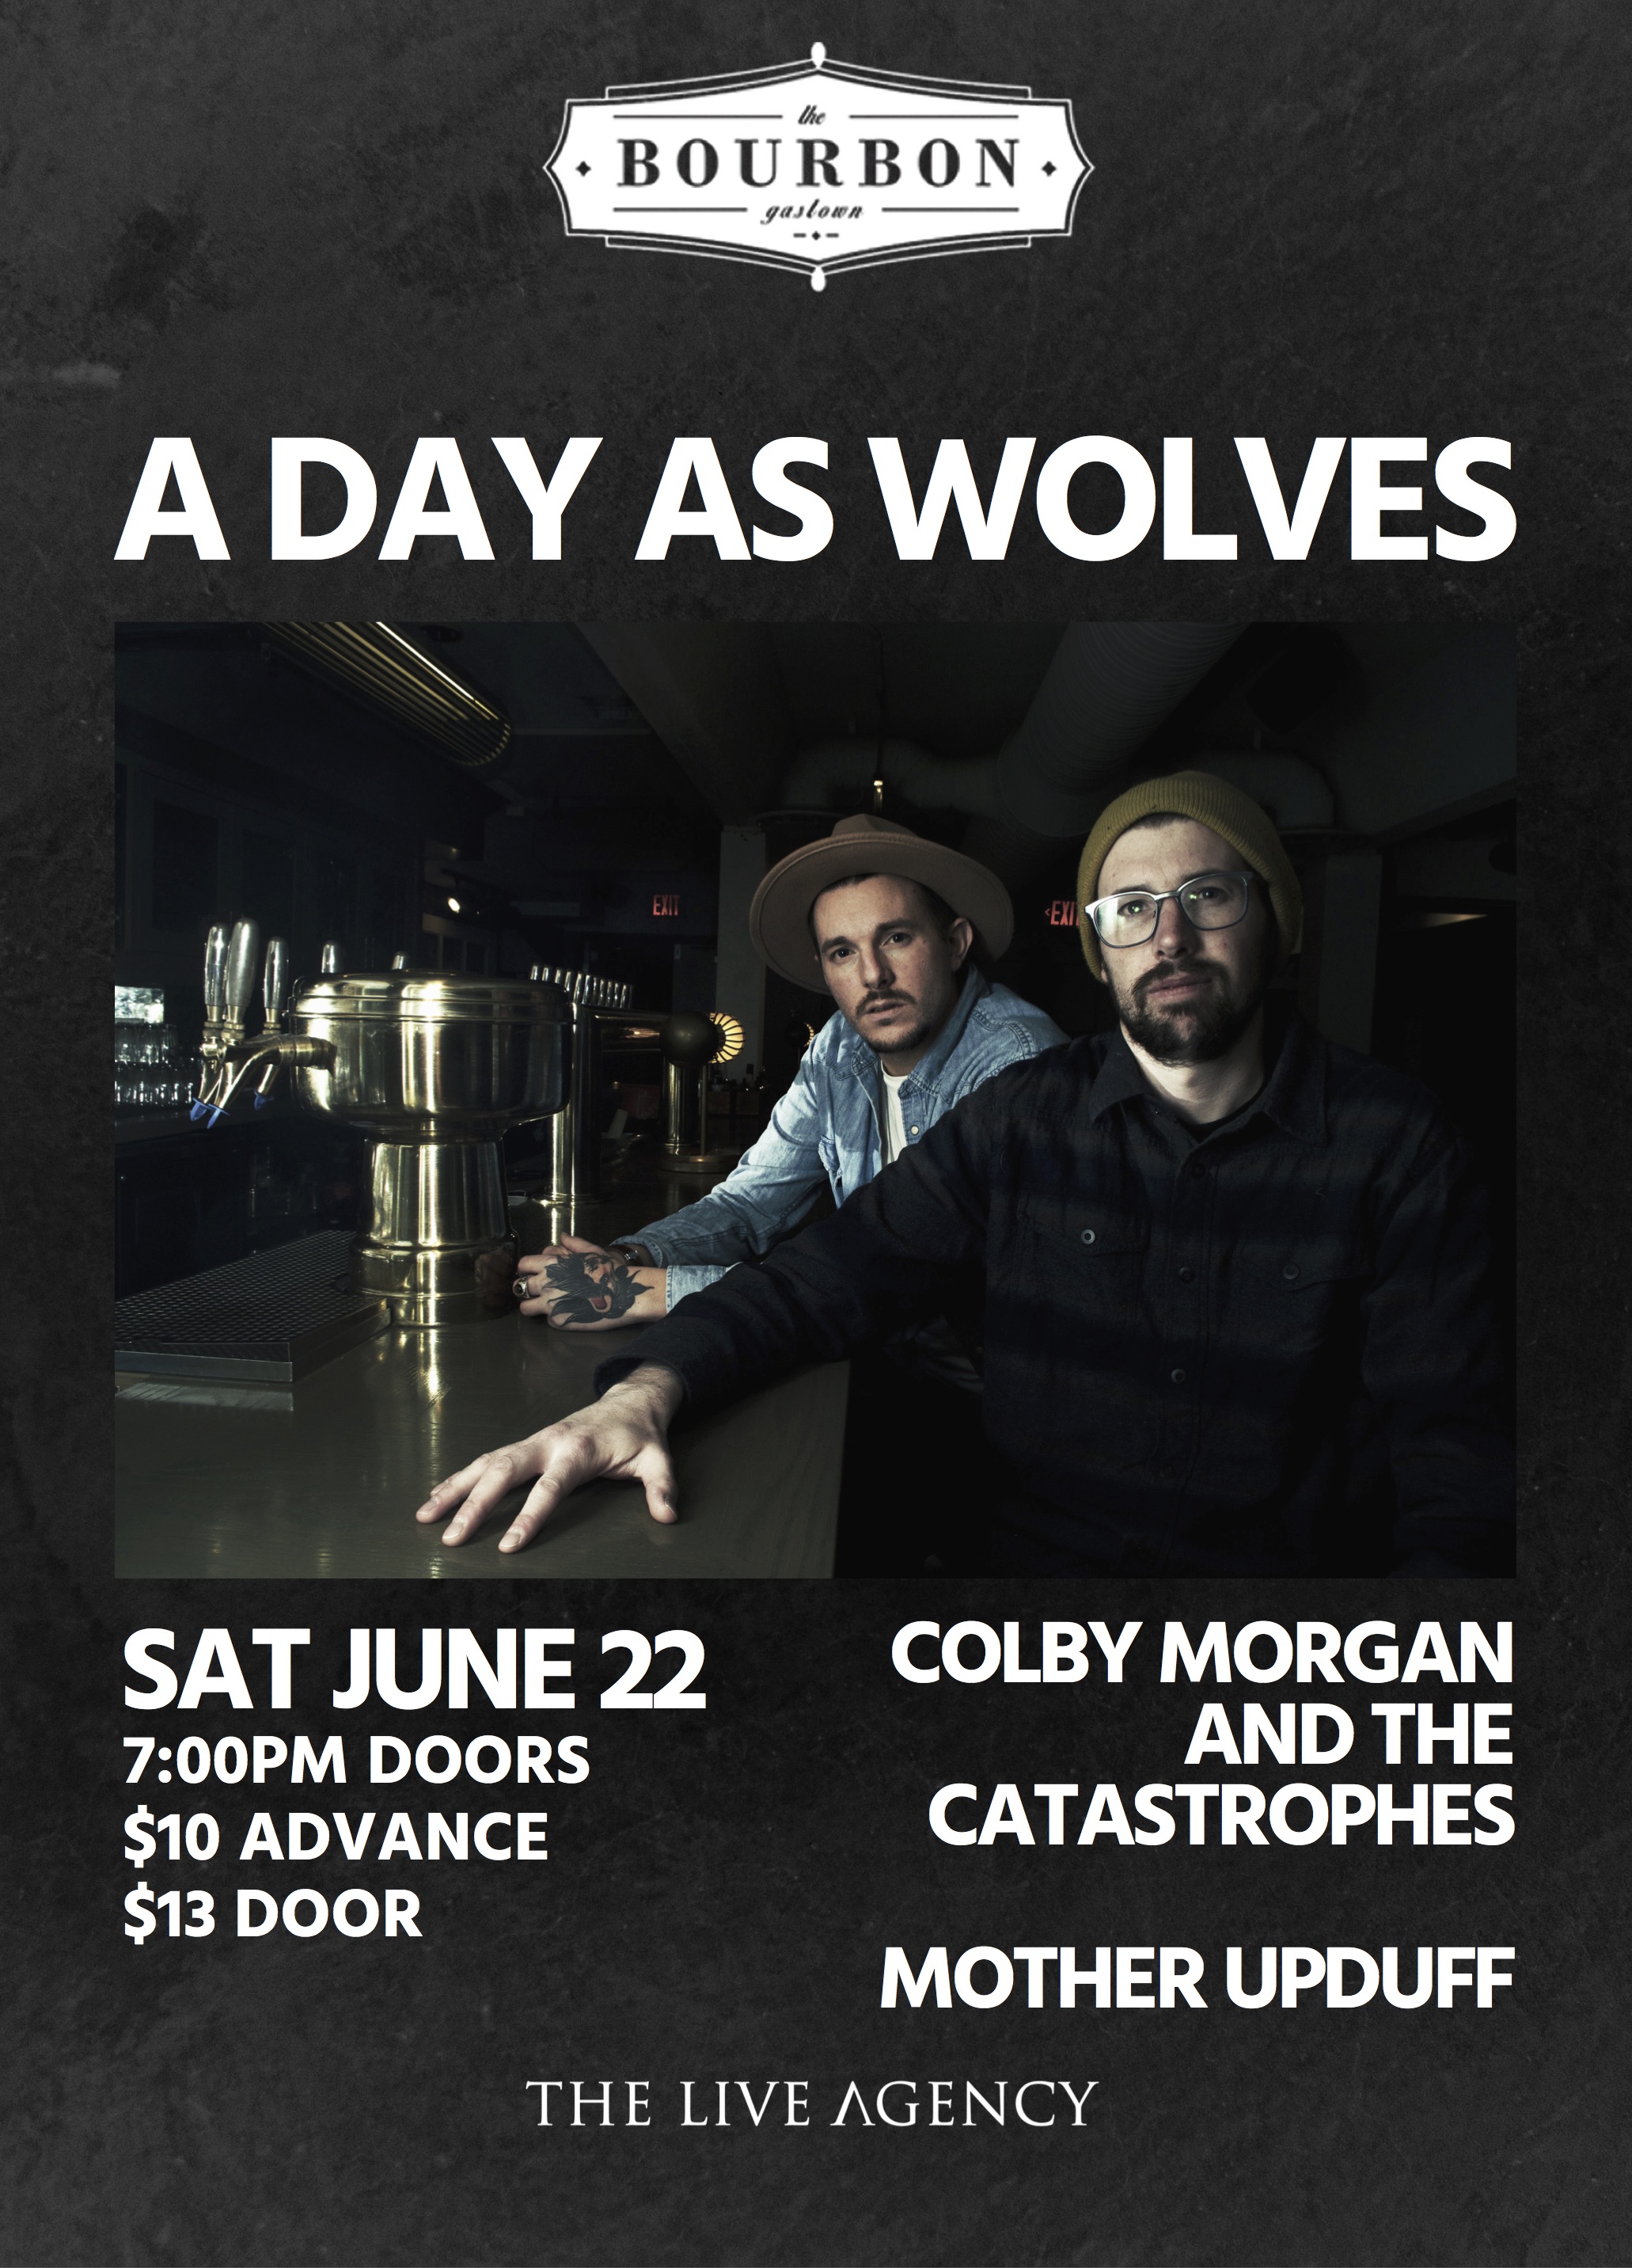 A Day As Wolves with Colby Morgan and the Catastrophes & Mother Upduff